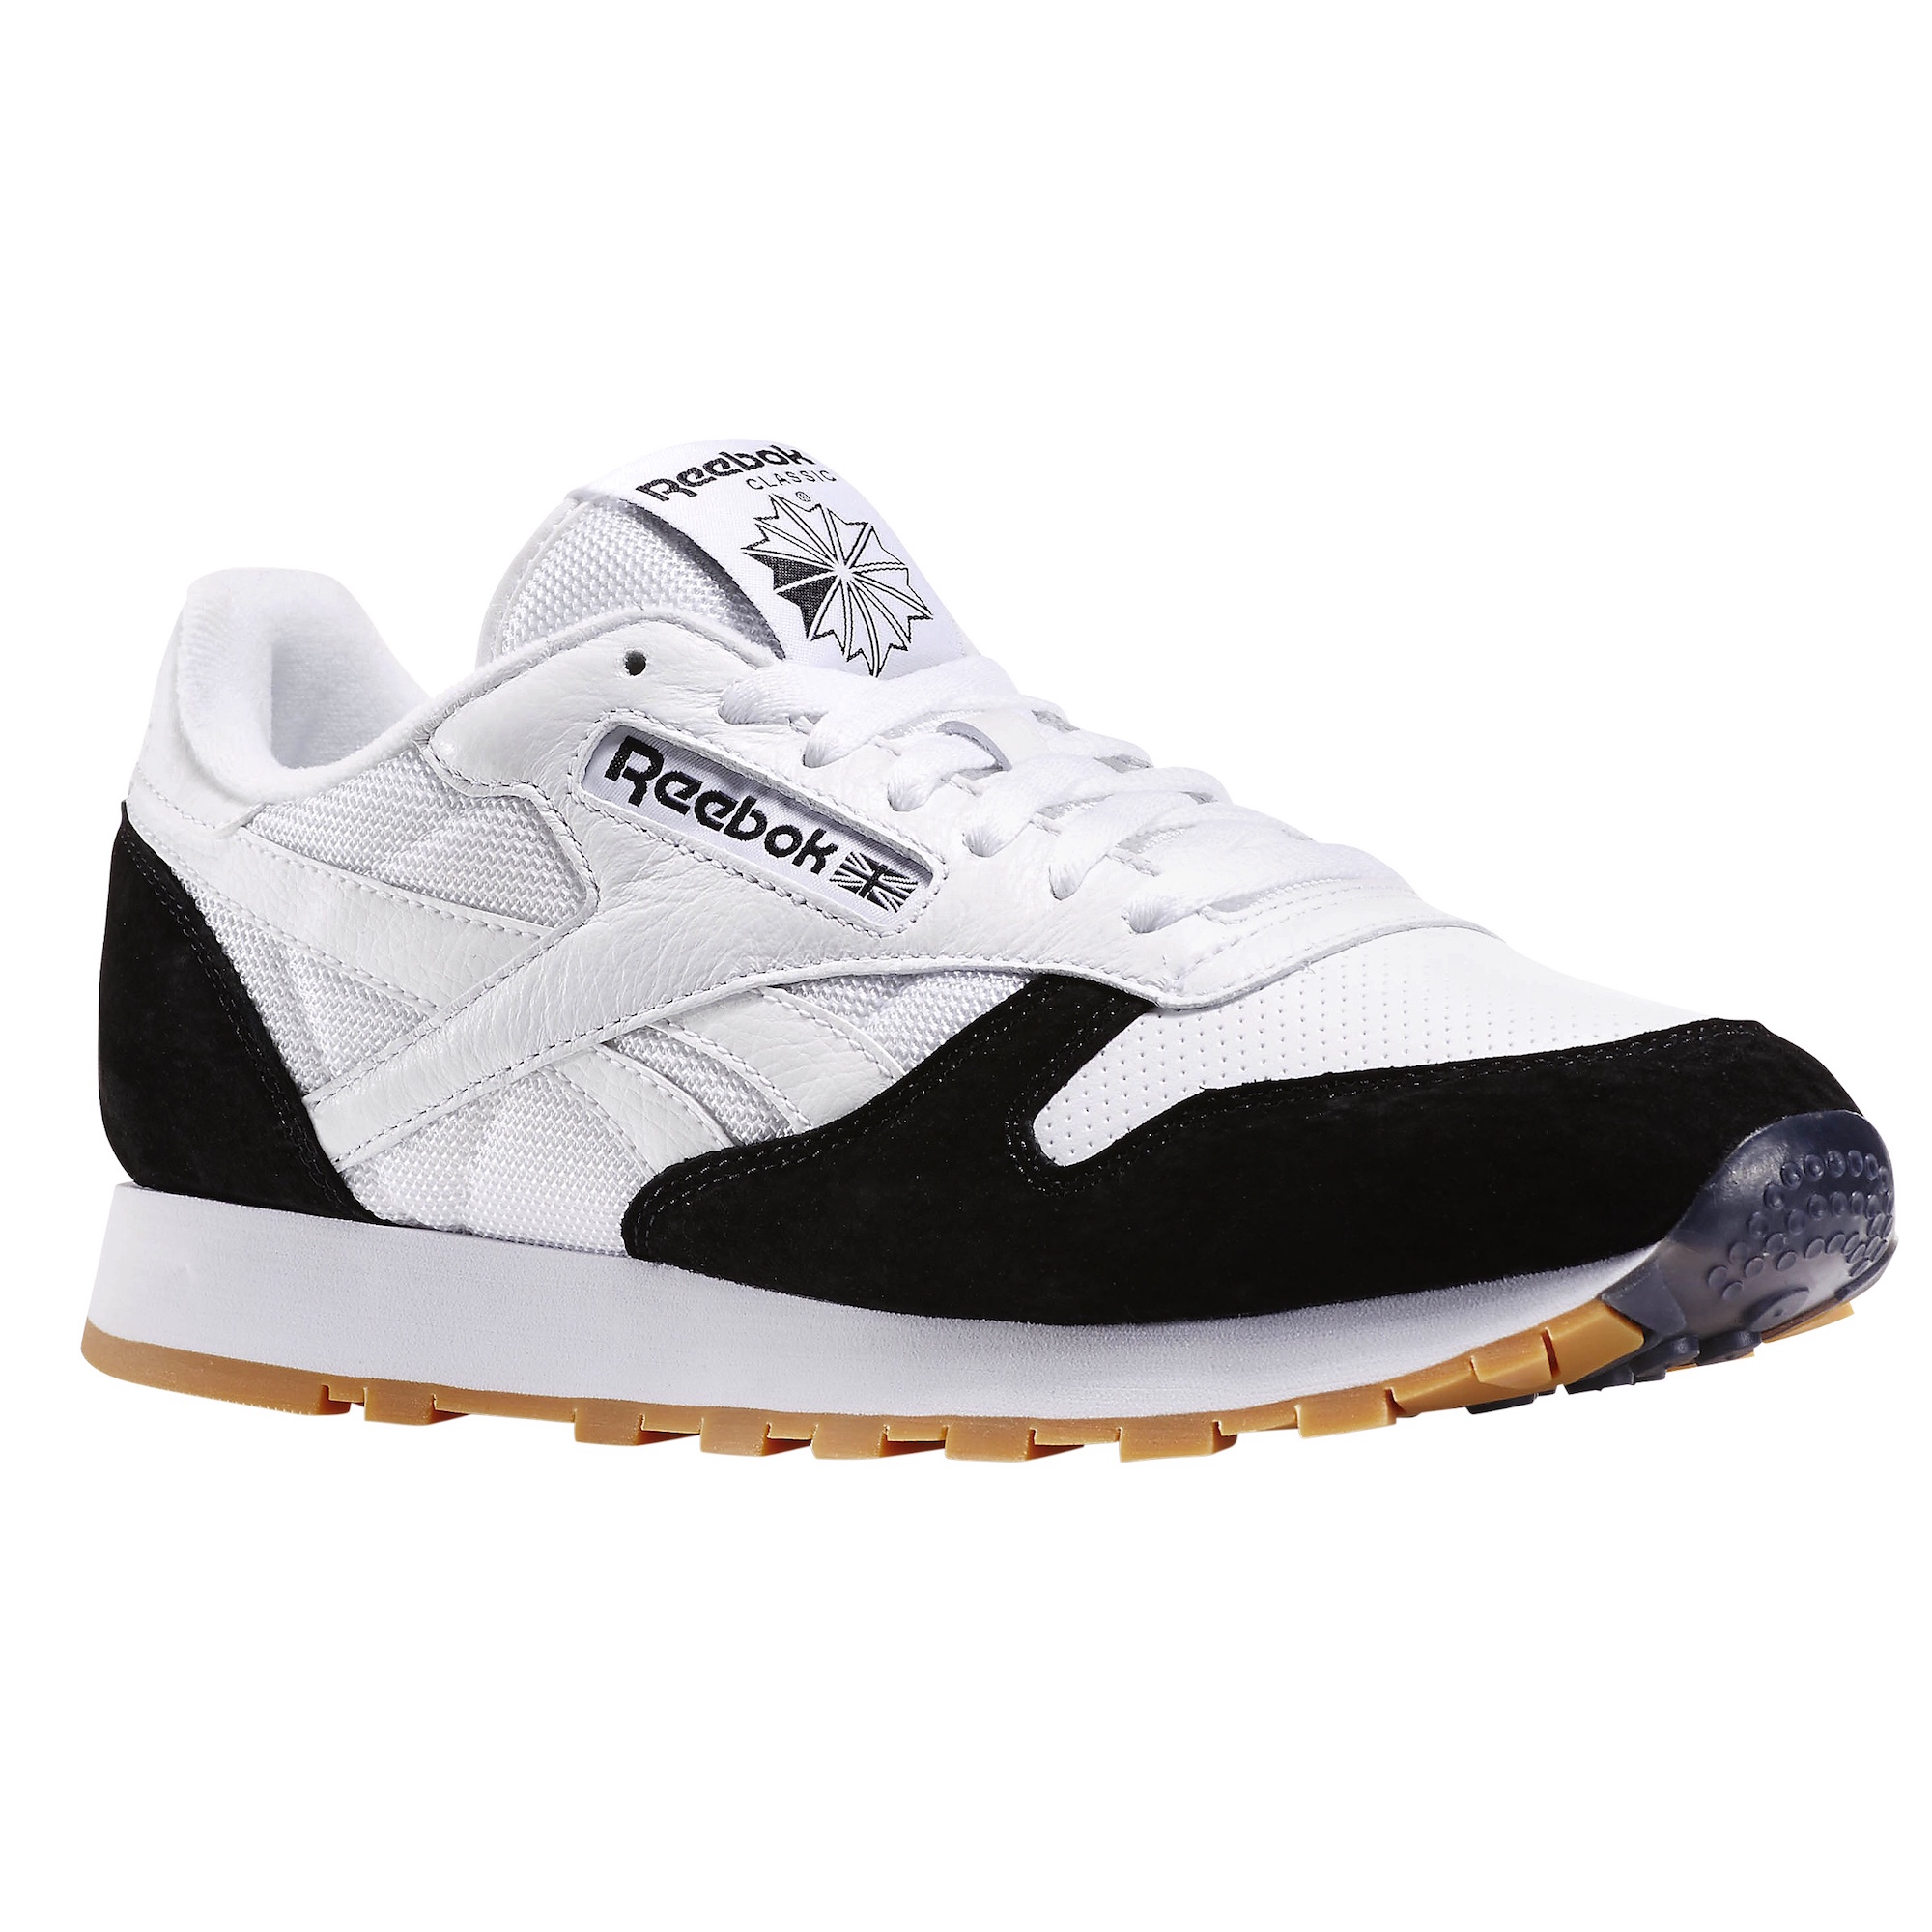 Kendrick Lamar Reebok Leather 'Perfect Split' Pack is Available - WearTesters